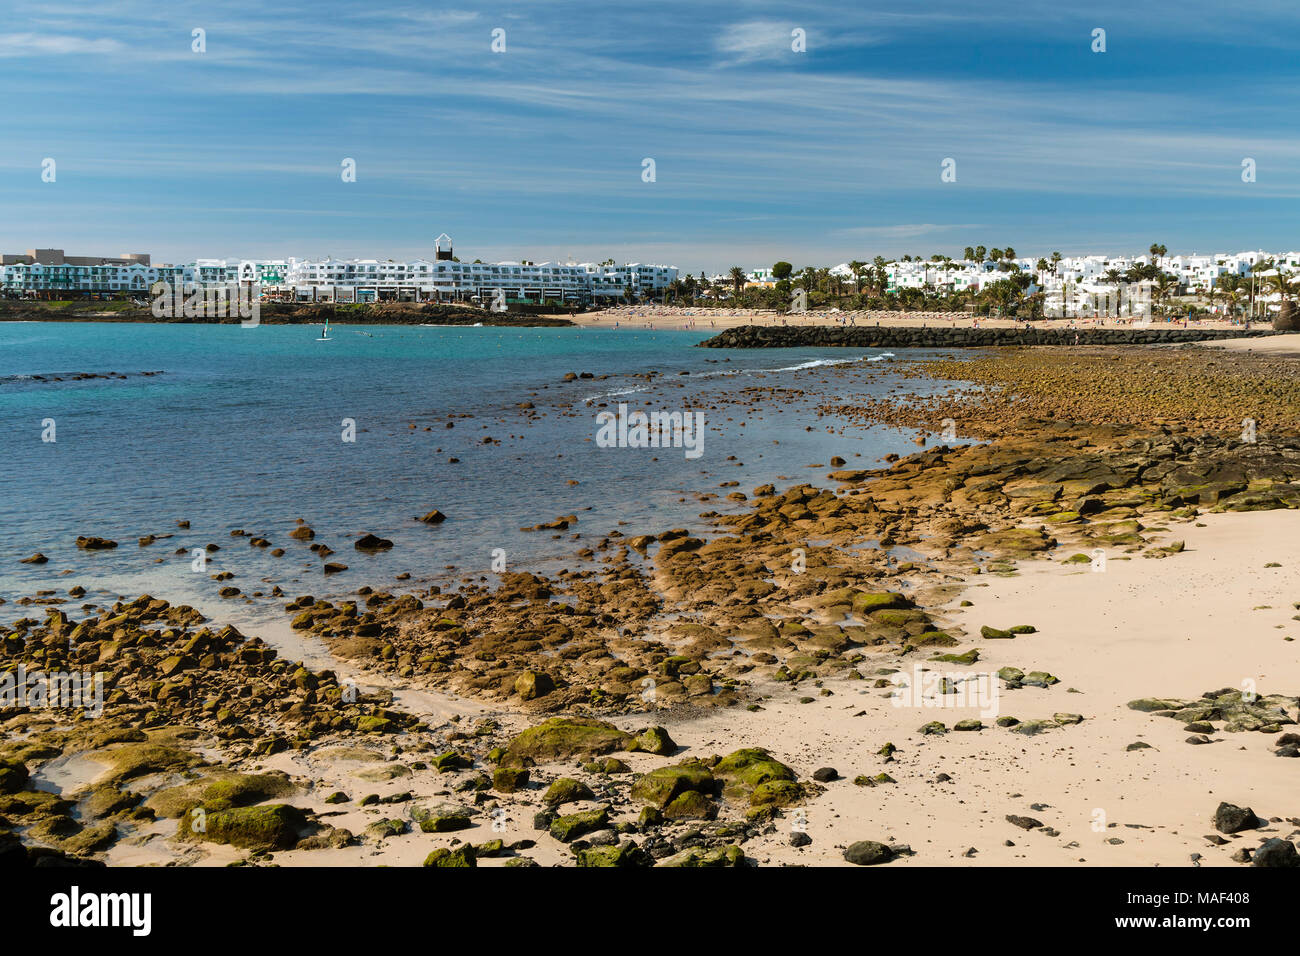 Costa Teguise Beach in Lanzarote, Spain with the village in the background. Stock Photo